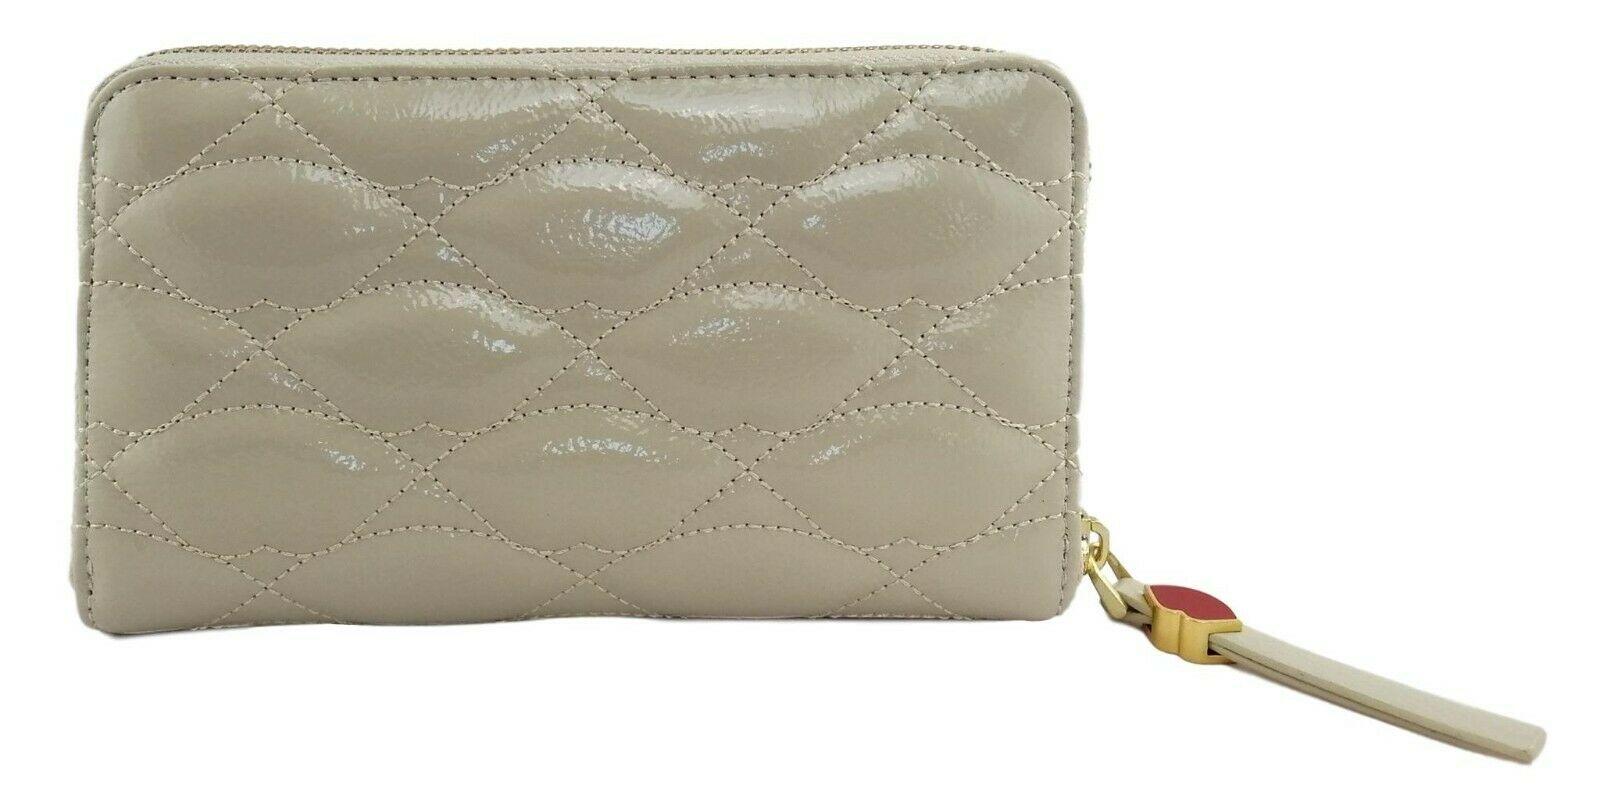 Buy Lulu Guinness Red Lip Aria Coin Purse from the Next UK online shop